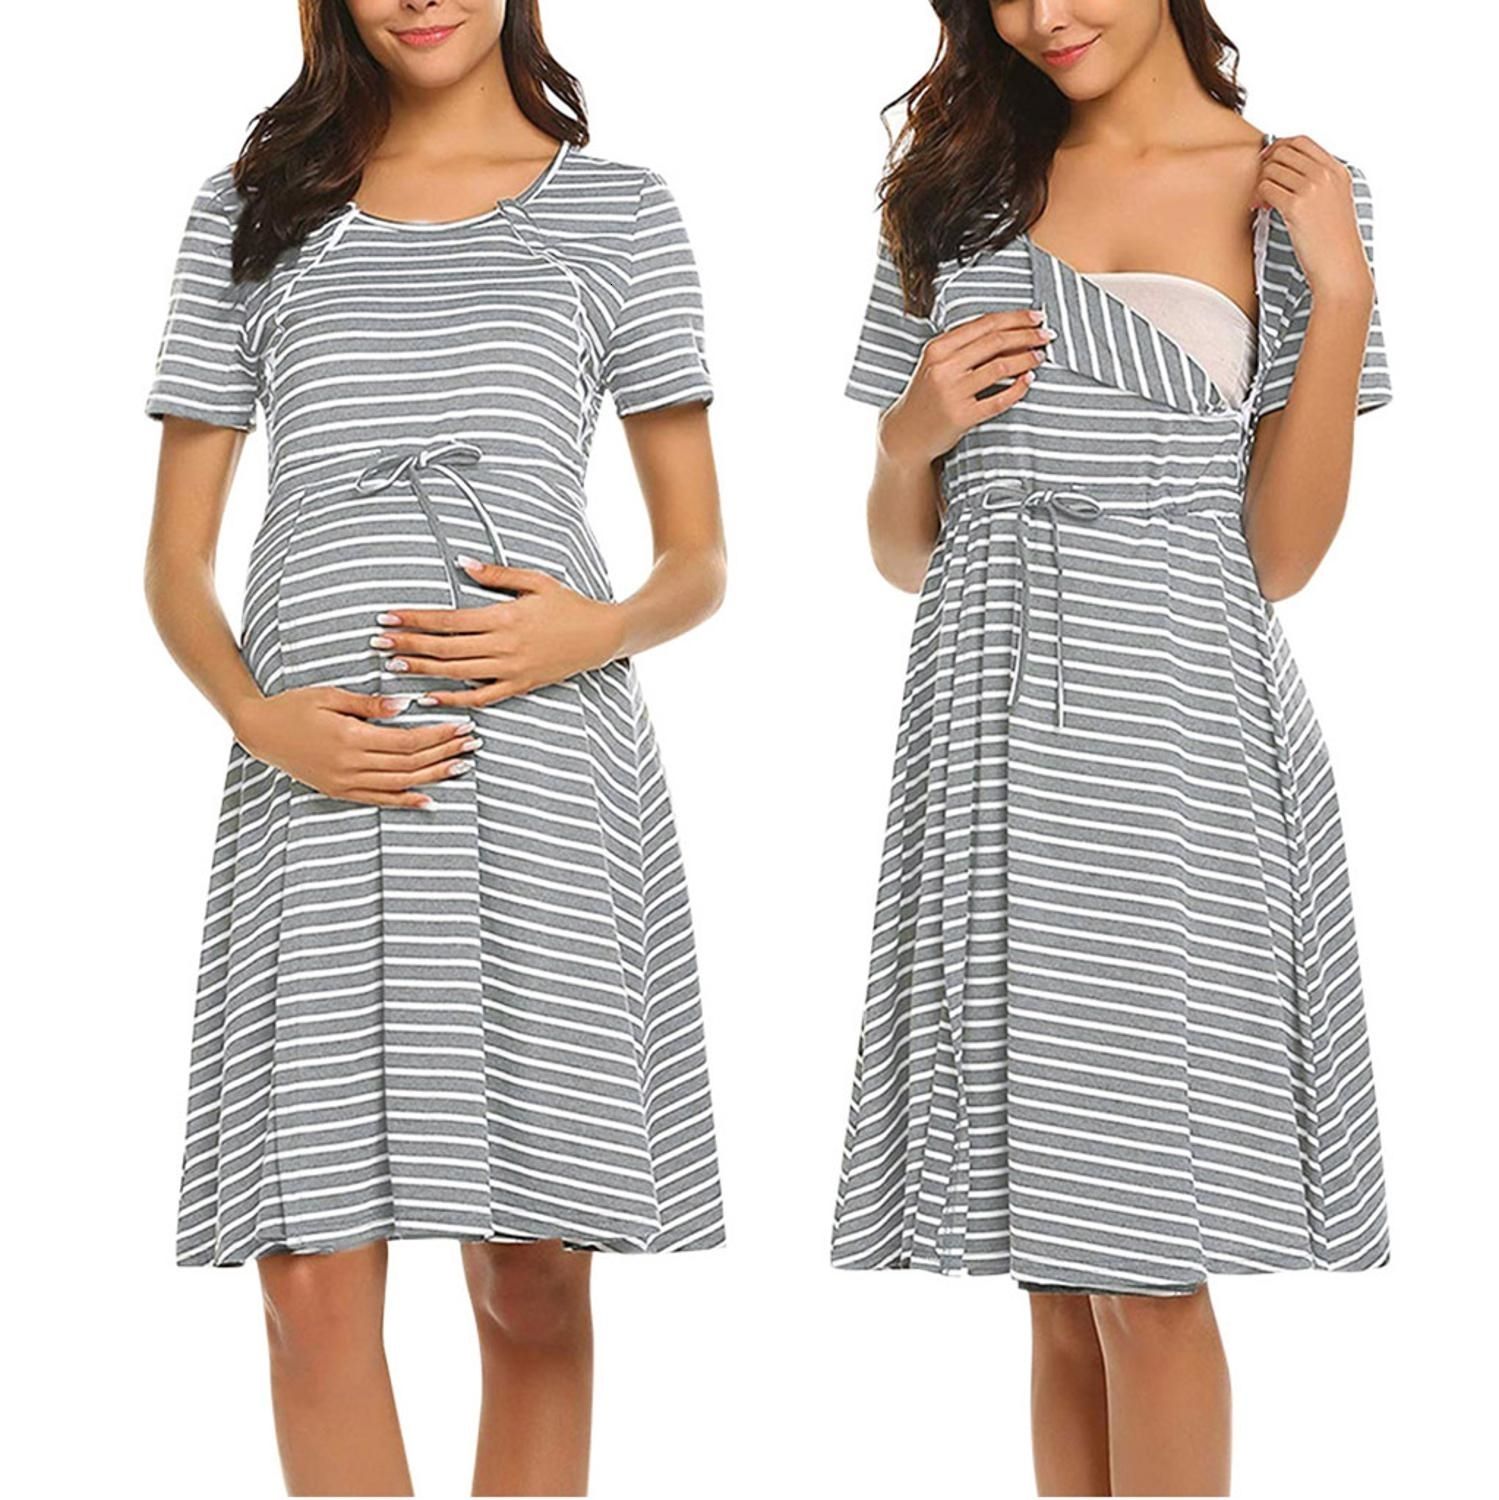 Maternity Hospital Camison Summer Casua Dresses Labor And Delivery Gown Striped Pajamas Nursing NightgownMX190912 From Pu10, $40.31 | DHgate.Com